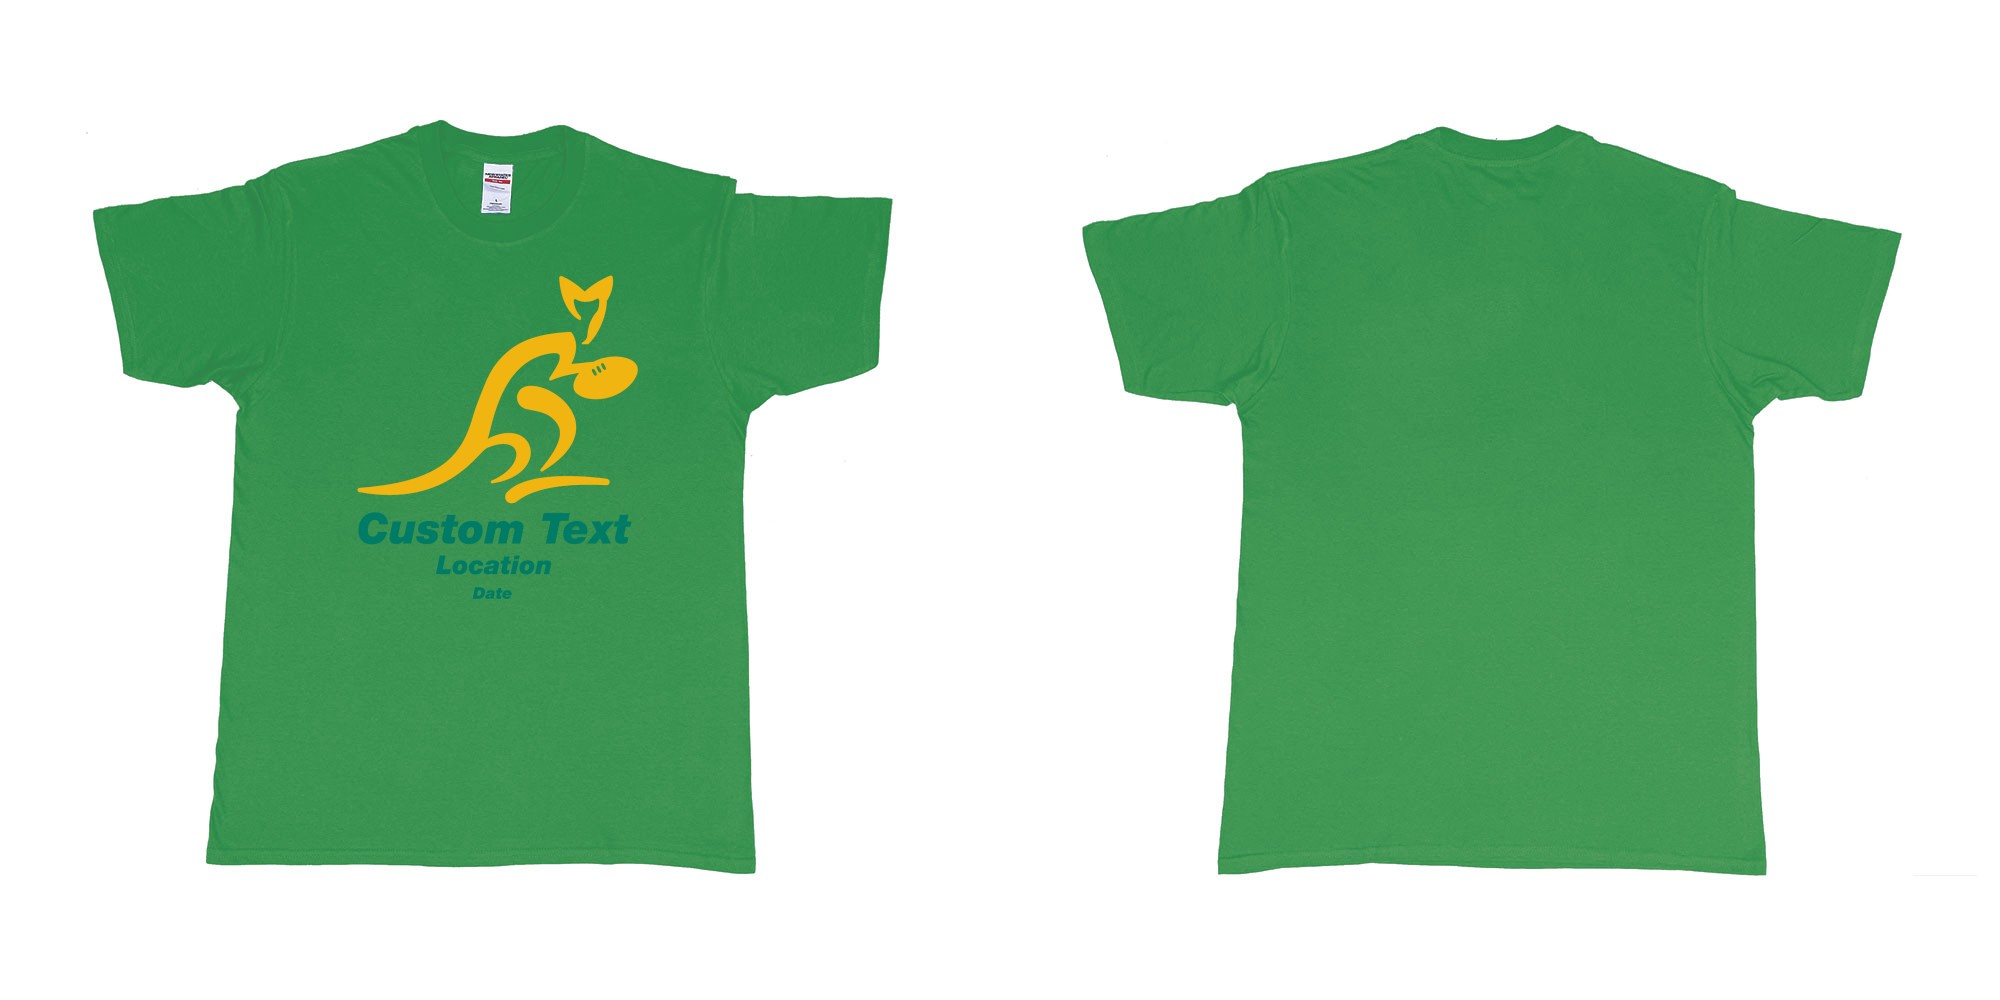 Custom tshirt design australia national rugby union team the wallabies in fabric color irish-green choice your own text made in Bali by The Pirate Way